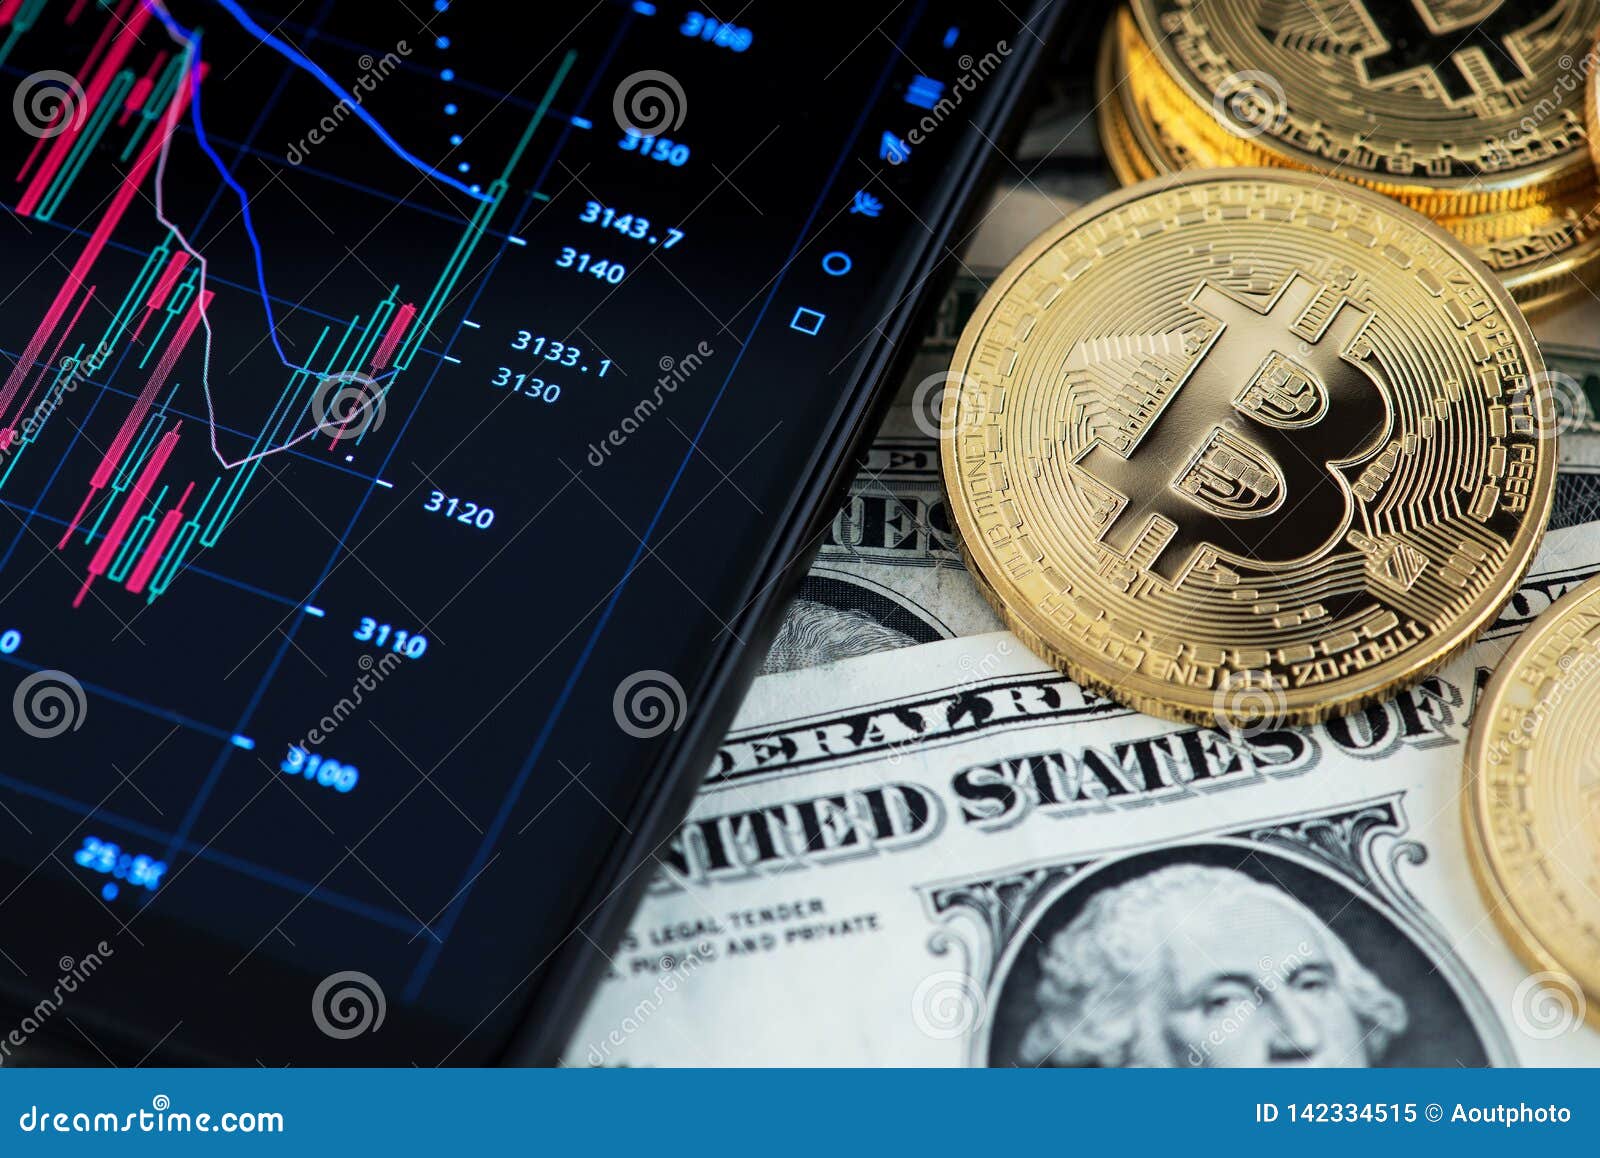 Bitcoin cryptocurrency and banknotes of one US dollar next to mobile phone showing candlestick chart.